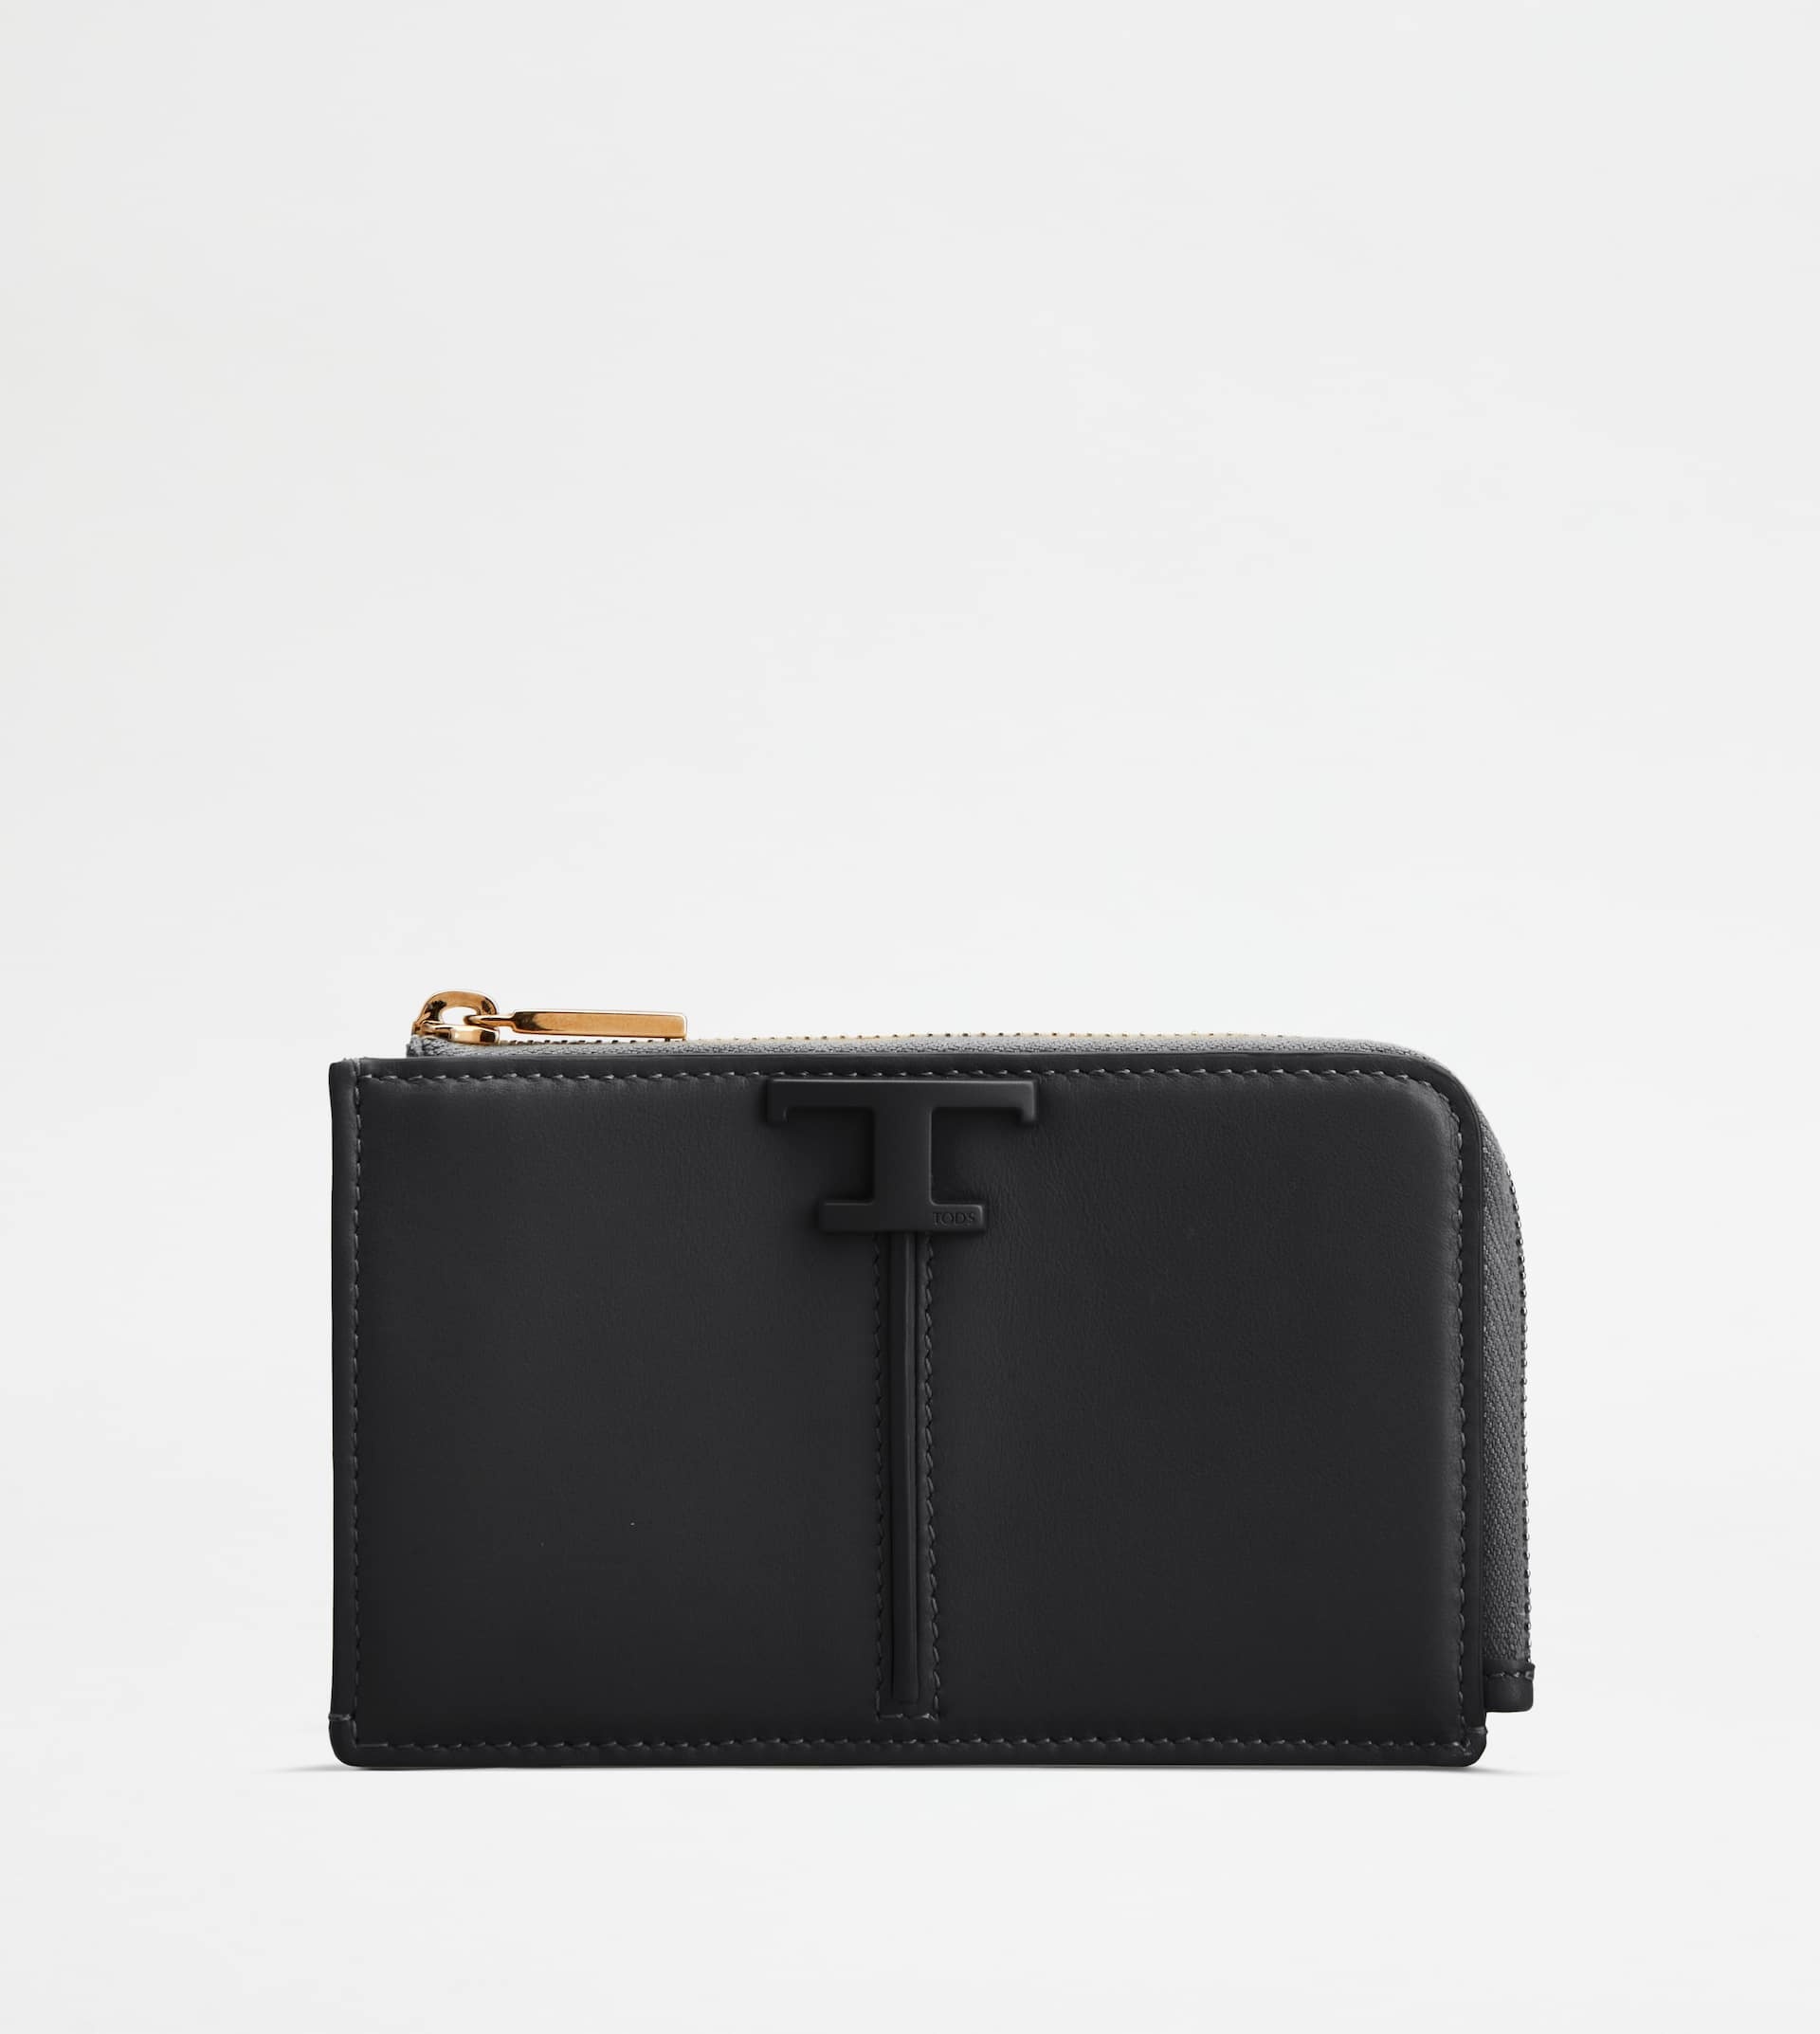 T TIMELESS KEY POUCH IN LEATHER - BLACK - 1